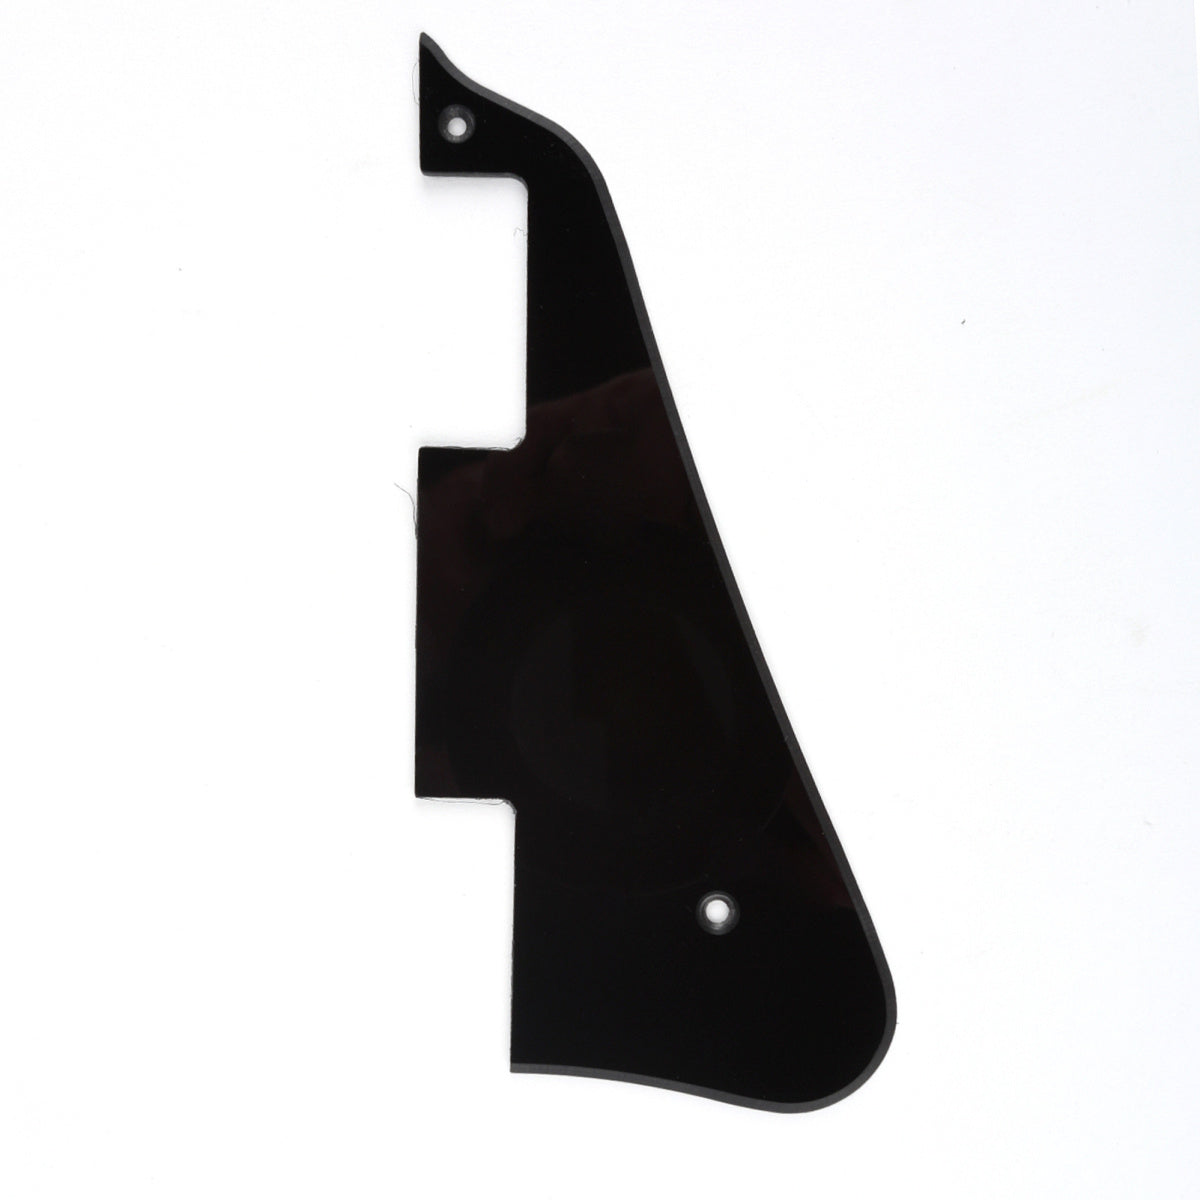 Musiclily Guitar Pickguard for China Made Epiphone Les Paul Standard Modern Style, 1Ply Black